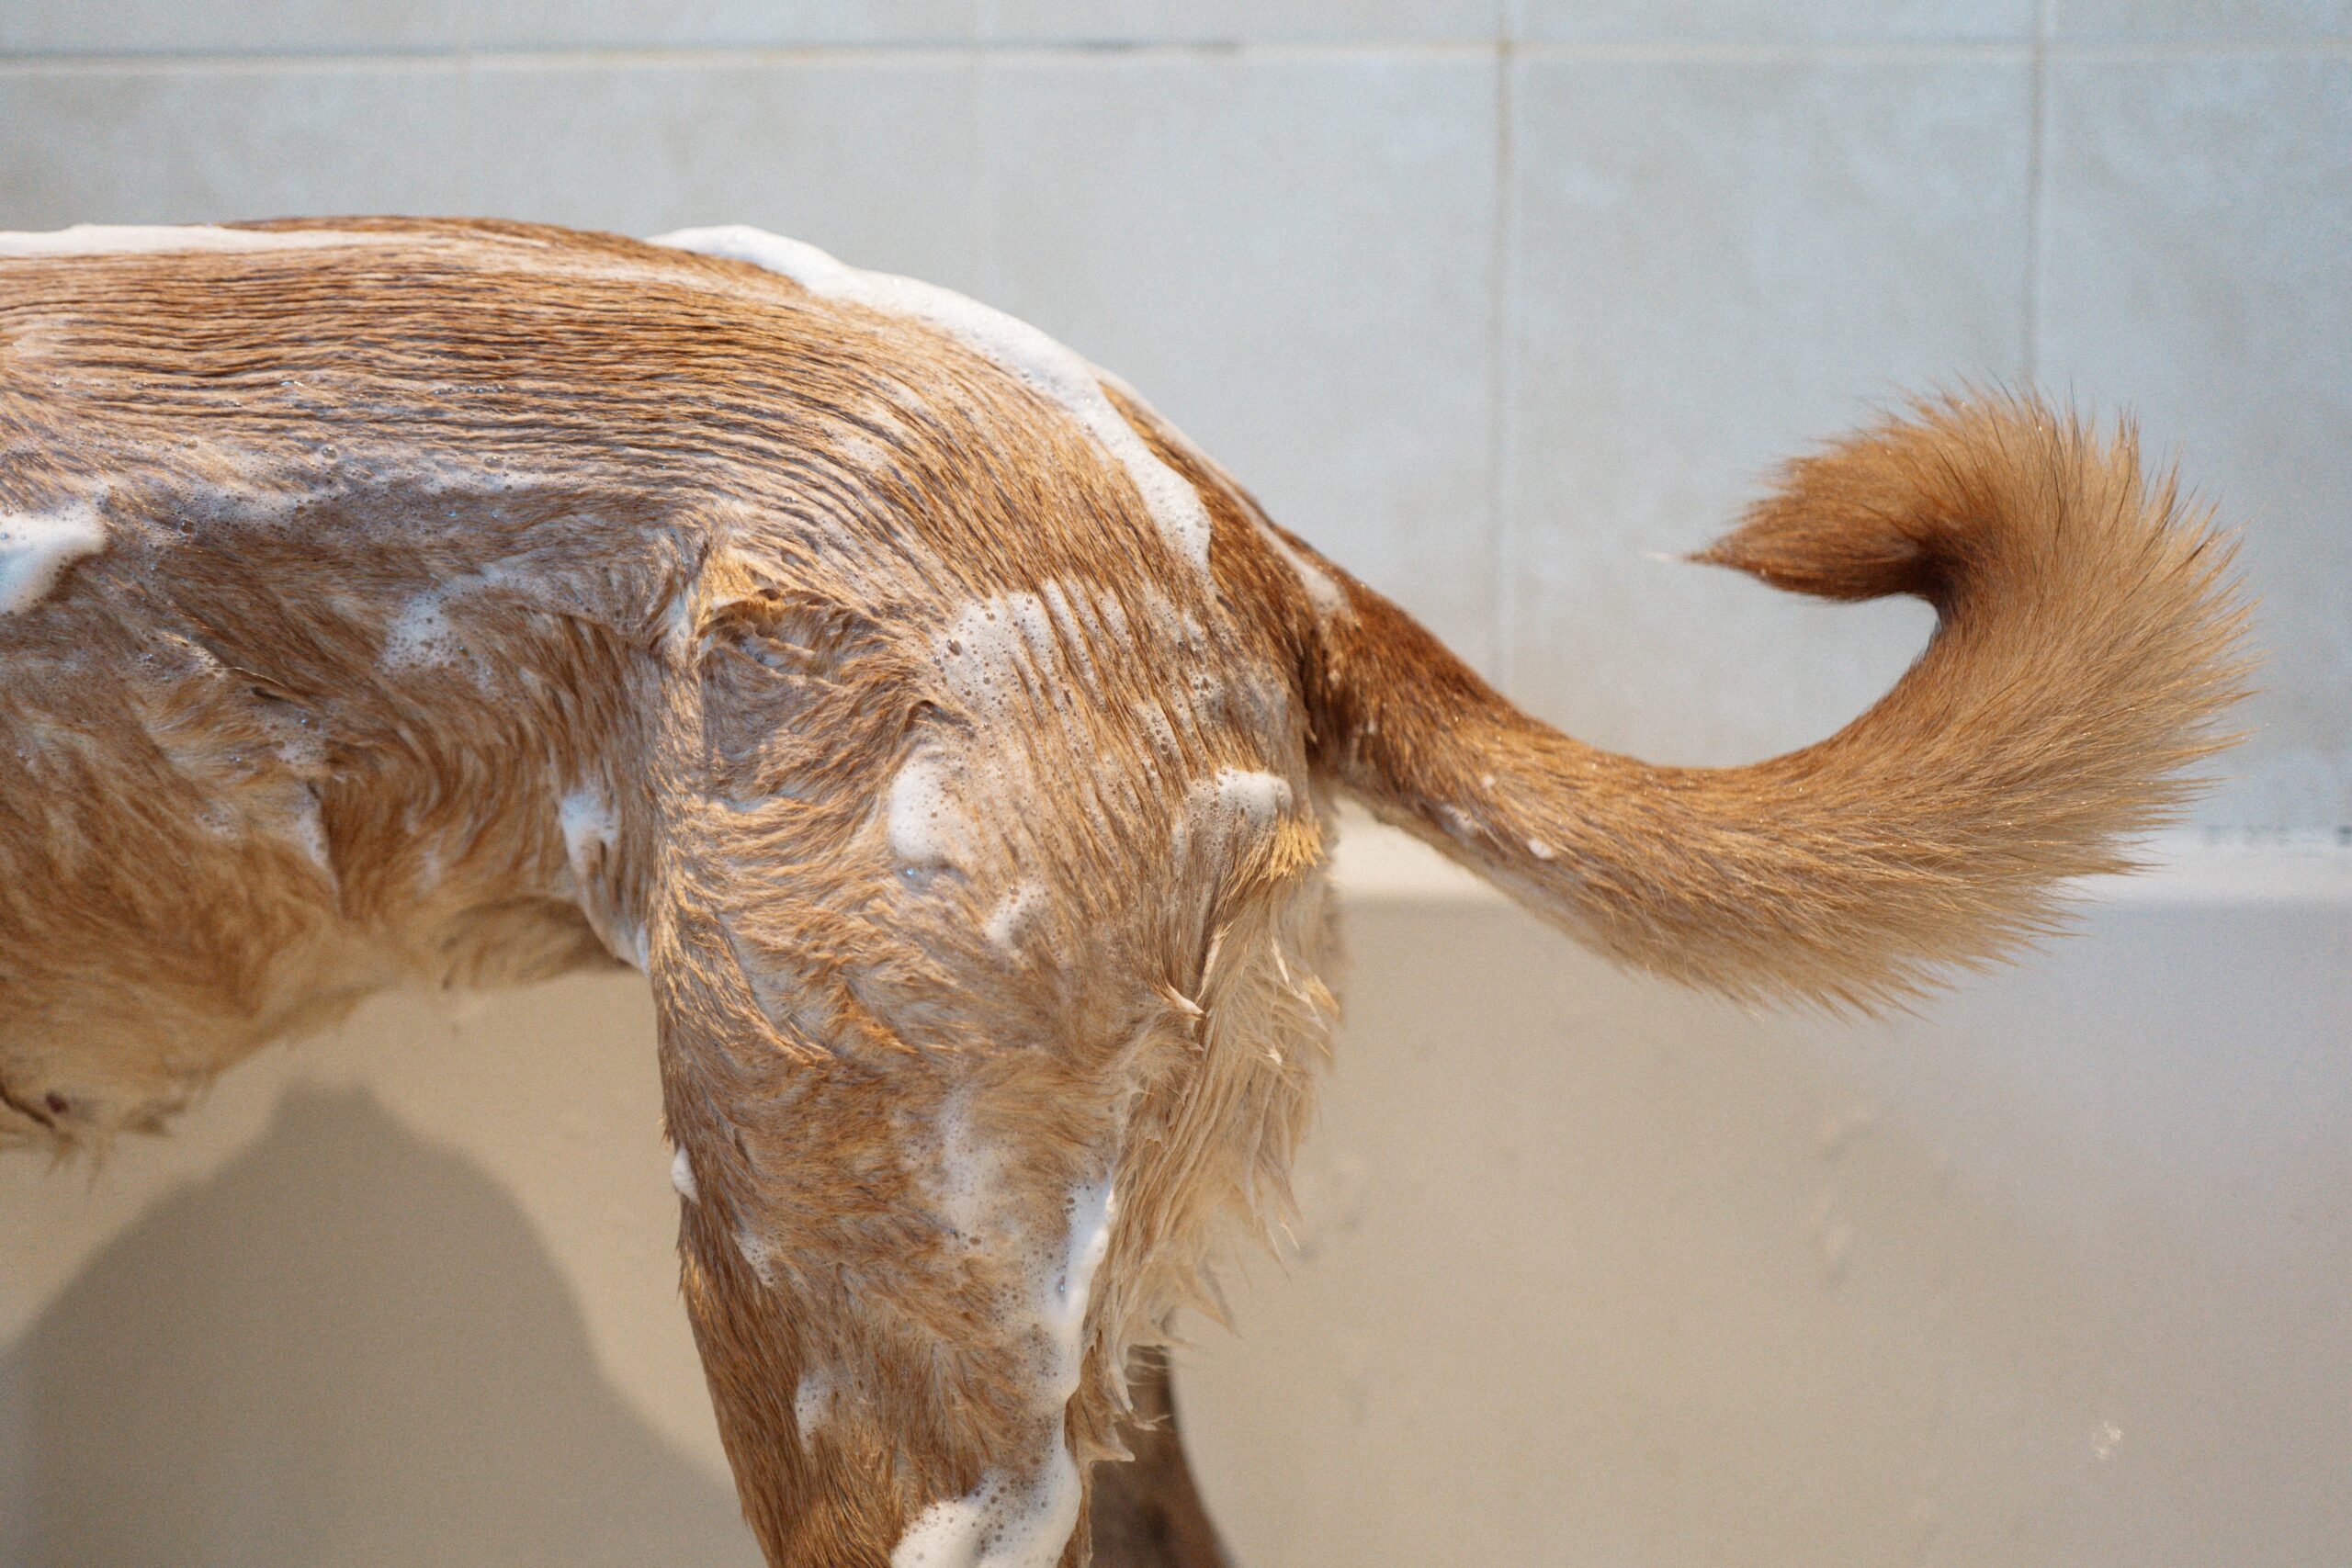 a brown dog standing next to a bath tub filled with water